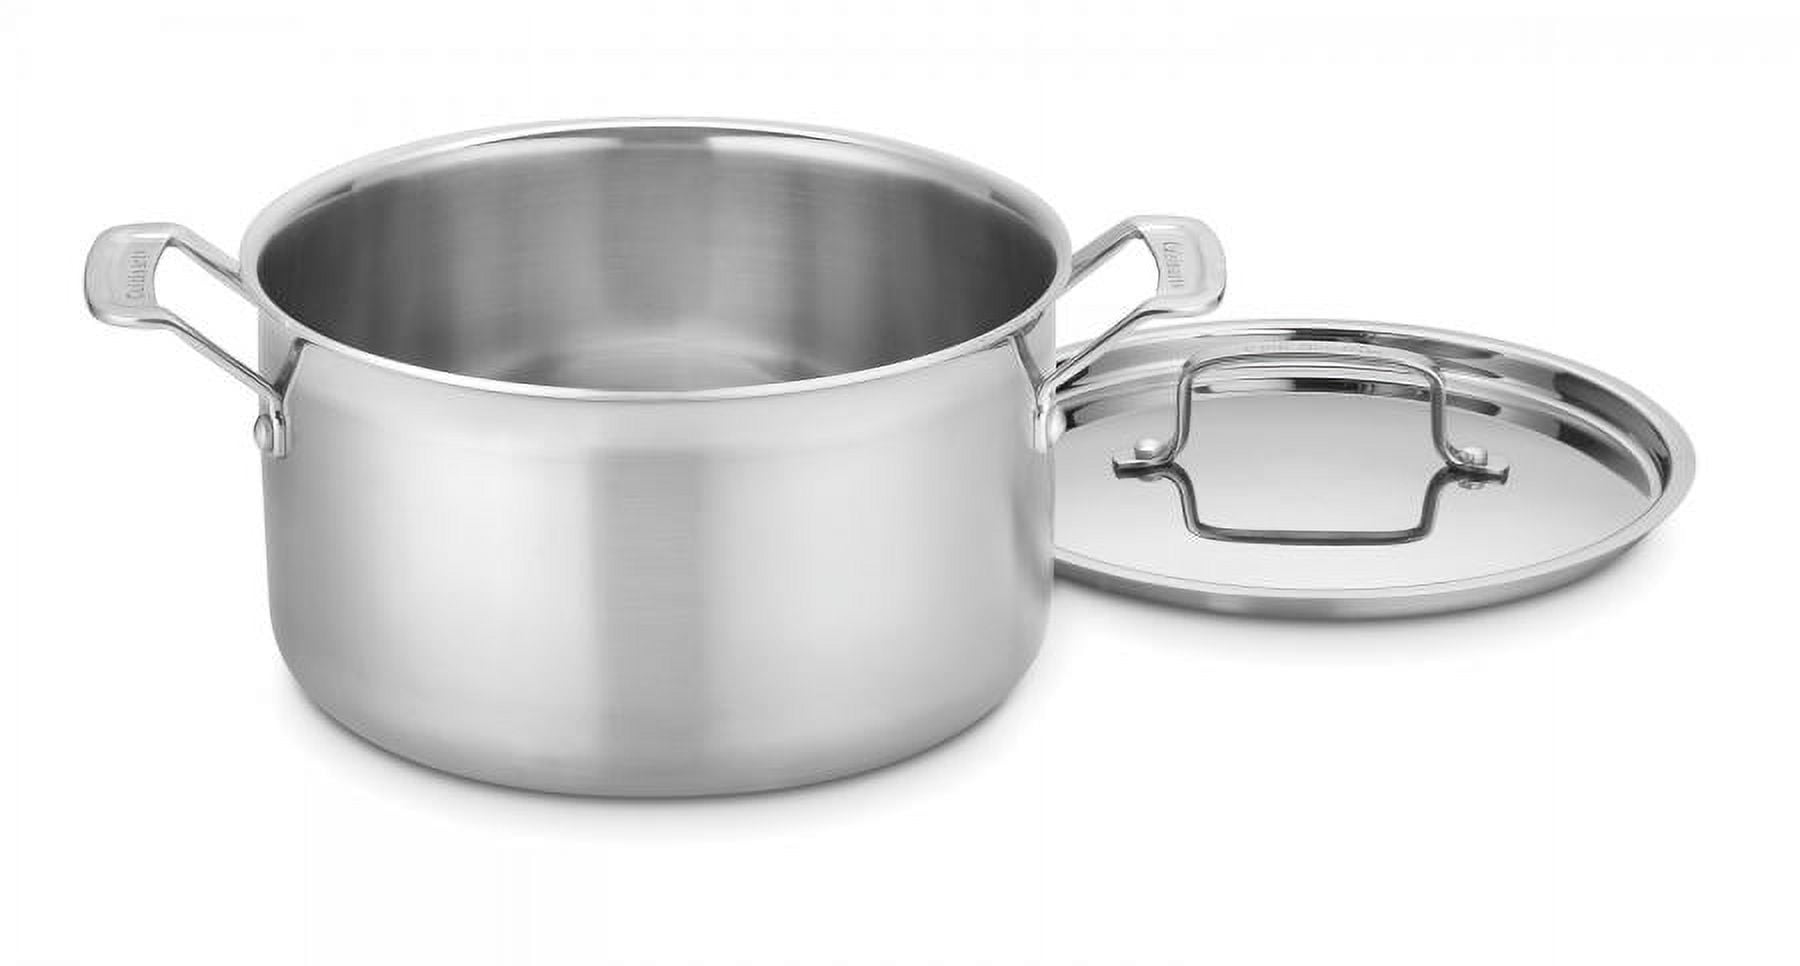 Cuisinart 6 qt. Stainless Steel Stock Pot with Lid & Reviews